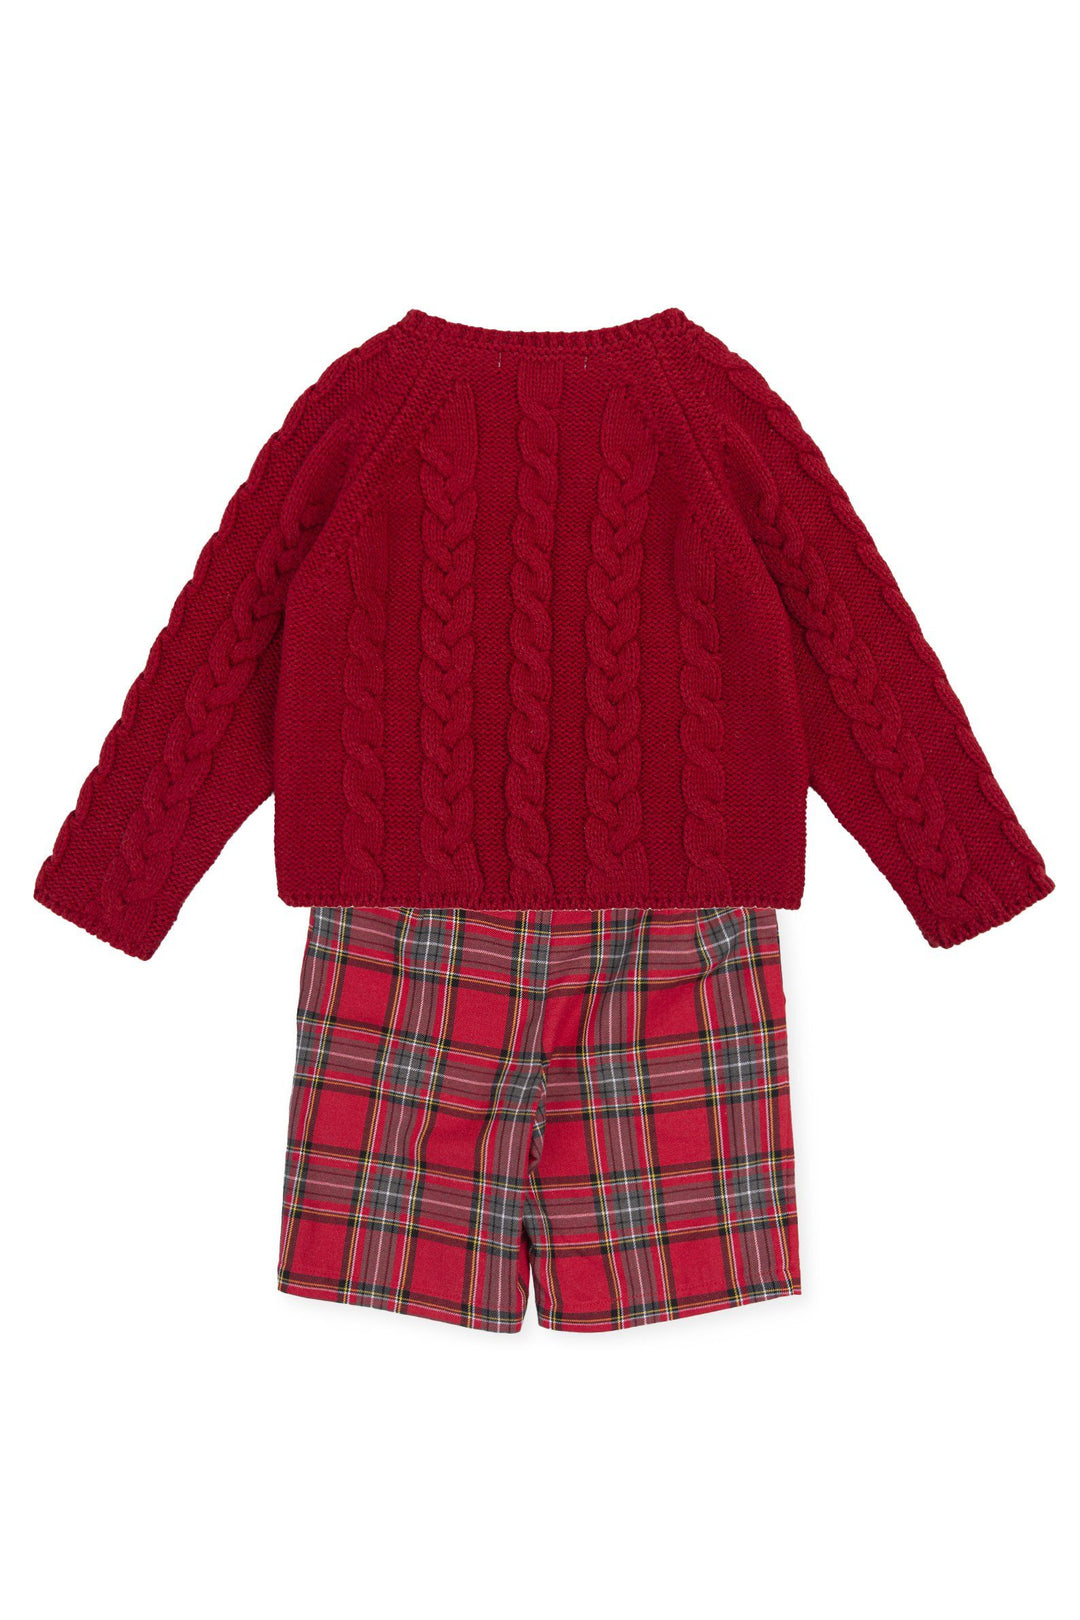 Tutto Piccolo "Nicolas" Red Cable Knit Jumper & Tartan Shorts | Millie and John